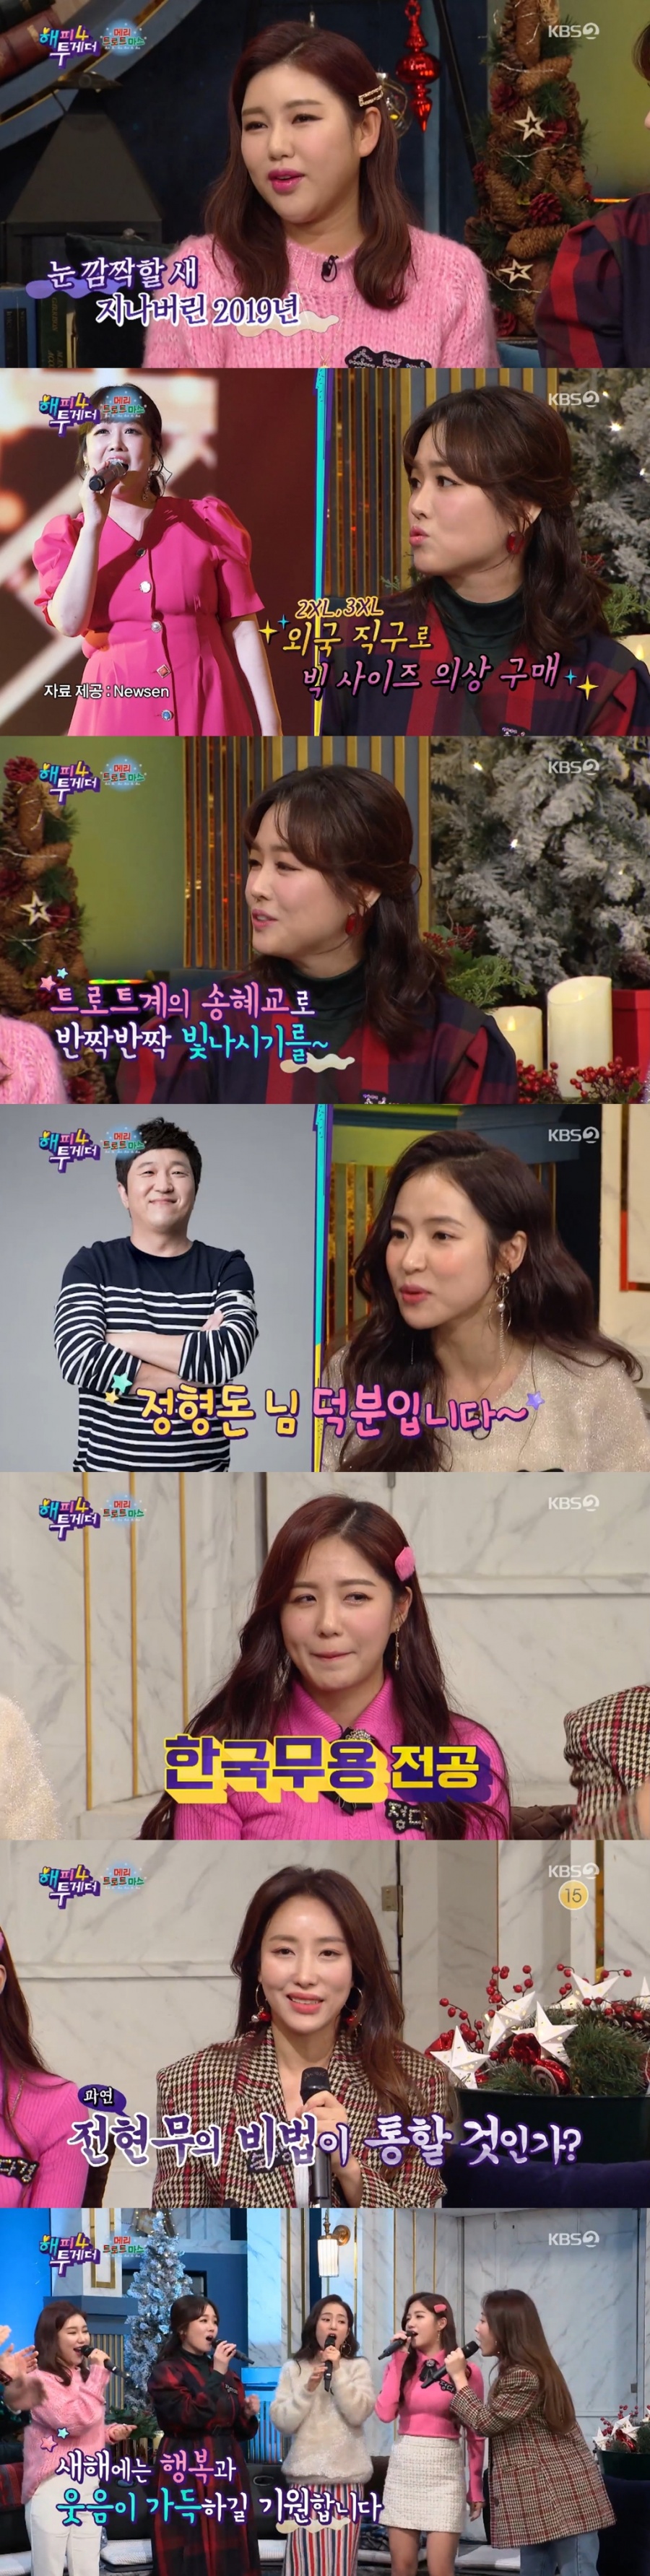 The excitement and dedication of Happy Together Trot actresses gave the best laugh.KBS2s Happy Together (hereinafter referred to as The Battle4), which aired on the 26th, was featured in Mary Trotmas.This feature, which was full of Song Ga-in, The Miami, Hongja, Jung Da Kyung, and Sook-haeng, which painted Korea as a Trot craze in 2019, became the best gift for viewers at the end of the year.The ratings also responded to the appearance of Trot actresses armed with excitement and dedication.According to Nielsen Korea, a ratings agency on December 27, the ratings of the broadcasts rose significantly from the previous broadcast, recording 5.5% of the nationwide ratings (1 parts) and 6.6% (2 parts).By metropolitan area, it recorded as much as 7.1% (part 2), proving that they are ratings fairy.Song Ga-in, who recently beat Feng in a vote and became the best hot star in 2019, said, I live and live and this day comes, it is still a dream.He also proved to be the best star of the year, referring to popular culture and arts awards, concert sales, and awards ceremony performances.His anecdote, which values the unity of the party, created a new character called Songdae, but in addition to this, he was impressed by the way he took a younger generation than anyone else.I did not even fit 2XL, 3XL, but now I have lost a size 66, said The Miami, who appeared to be out of weight.When another cast member found Song Hye-kyos face in the weightless Song Ga-in, he initially denied it, saying, I actually heard such a story from a young age.Hongja, who says the year of reincarnation this year, said he lost his real name Park Ji-min at home and said, My mother also calls me Hongja ~ and laughed.Now, the name Hongja, which is more like a real name than his real name, is the name born thanks to Jung Hyung Don. I want to buy you a meal.The Korean dance version of Mamma, which boasts a beautiful dance line, and the parade of the trot-based Cy Young-heung-saeng-saeng parade also focused attention.In addition, Jung Dae-kyung introduced the way to be a drink at the end of the year, and all of them burst into bread, and the song of Beyonce was reinterpreted as Trot, saying that any song can be trotted.FLEX, a Trot actress due to her income that changed this year, also attracted attention.From Song Ga-in, who added the partment value of his brothers brother, to The Miami, which made the first luxury shopping, to Hongja, whose income increased 20 times.The story of those who are having a rich year-end with the love of their fans was surprising.In addition, the lecture of the seniors toward the trot-based super-class newcomer, the legacy, was a laughing point.It is a one-point lesson for strong control, vibration, stage manners, etc., and upgraded the heritage chain further.In addition, Song Ga-in proposed a duet with Yun Song and said, The profit is 5 to 5, and the song is more.As Trot Avengers gathered, they could not miss the song Gift, and they sang their own life songs with their stories, and they were moistened with emotion on Thursday night of viewers.Finally, their carols unfolded, giving them magical happiness on the last Thursday night in 2019.The magical Thursday night with the best stars, KBS2 Happy Together is broadcast every Thursday at 11:10 pm.=